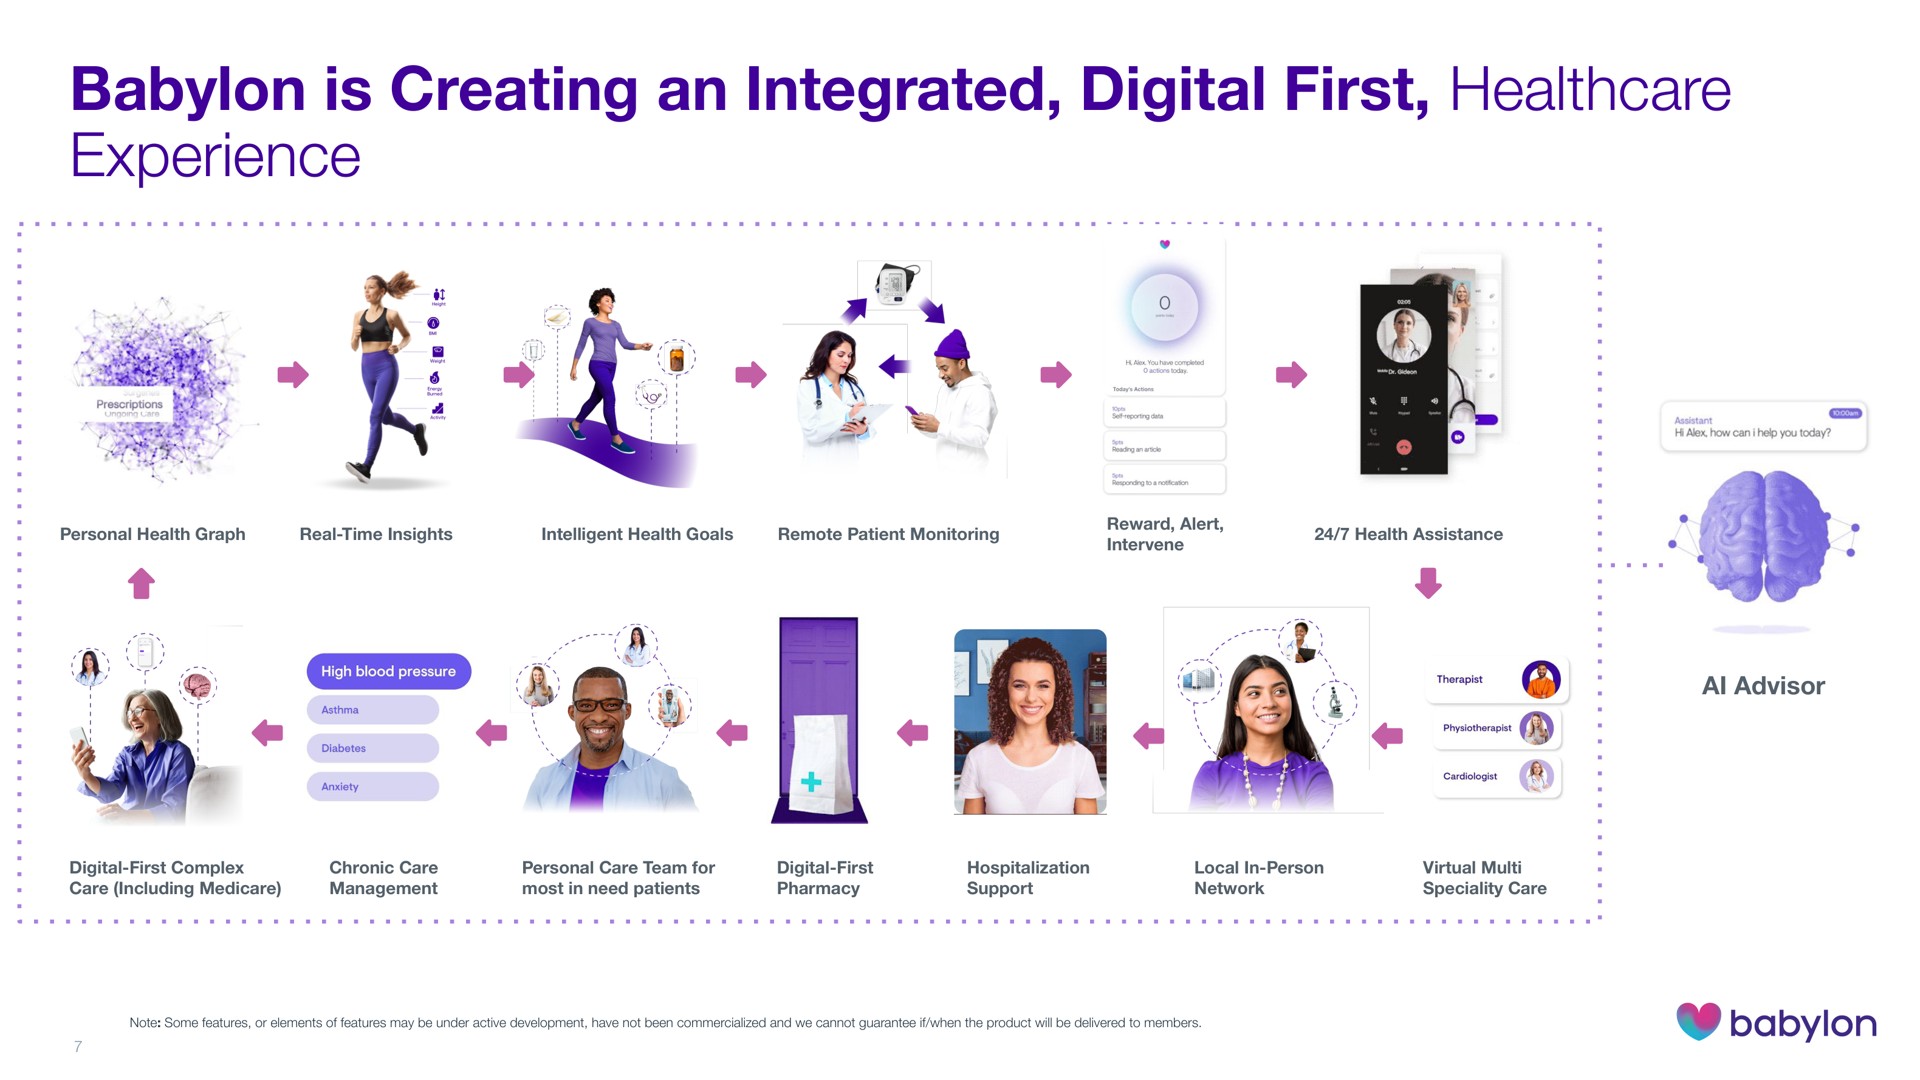 is creating an integrated digital first experience | Babylon